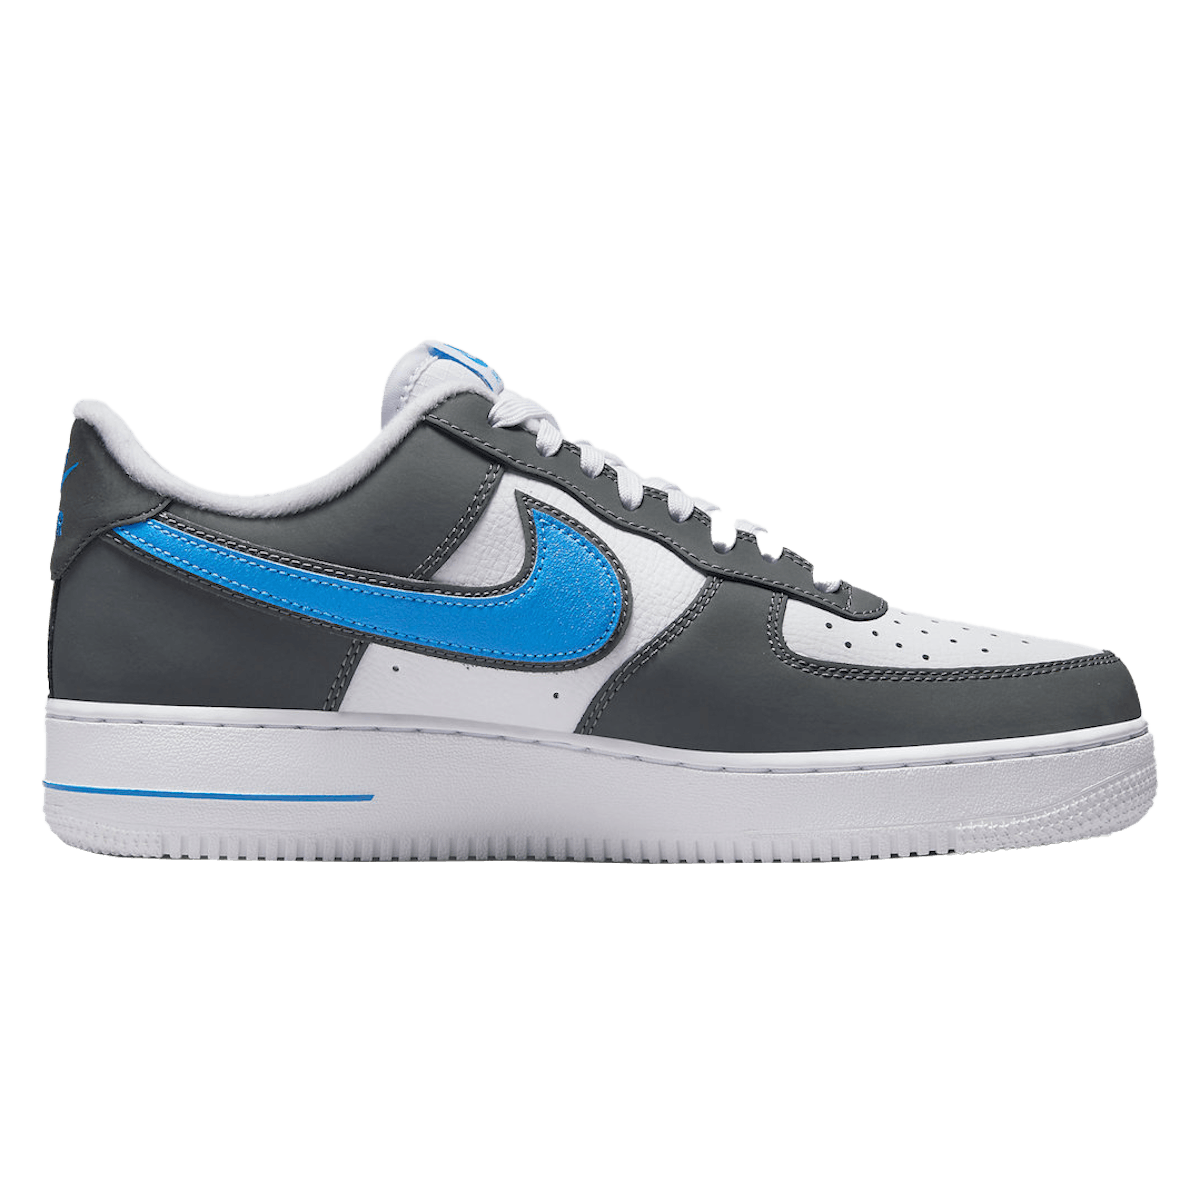 Nike Air Force 1 '07 Low "Photo Blue"